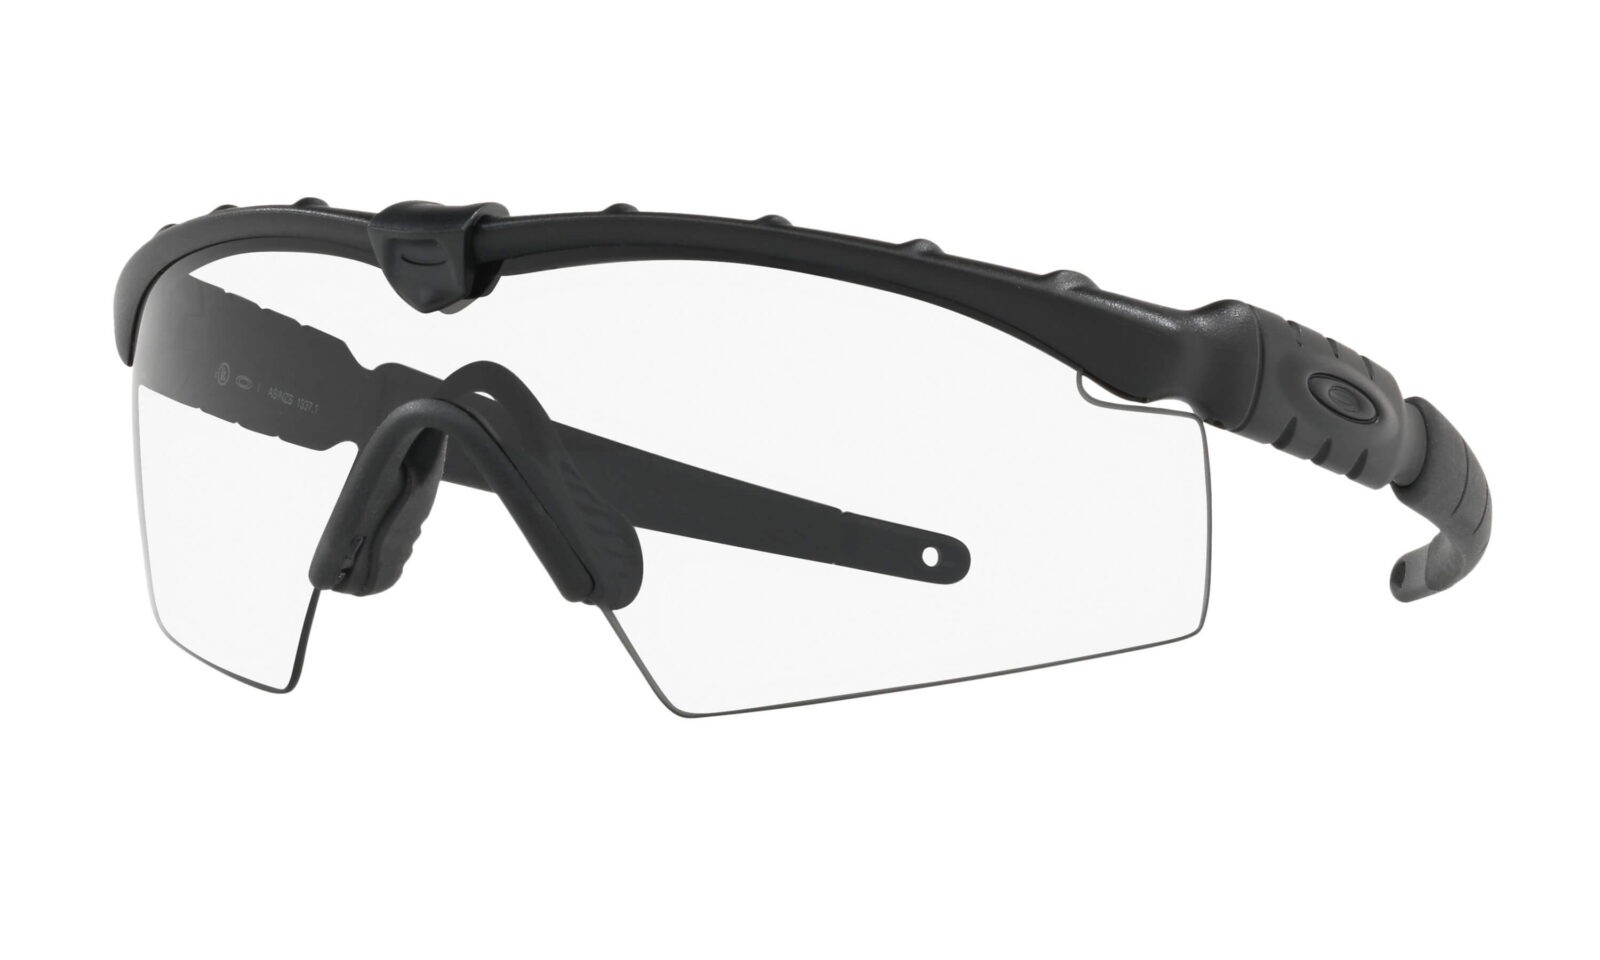 Oakley Safety Glasses That Meet ANSI 